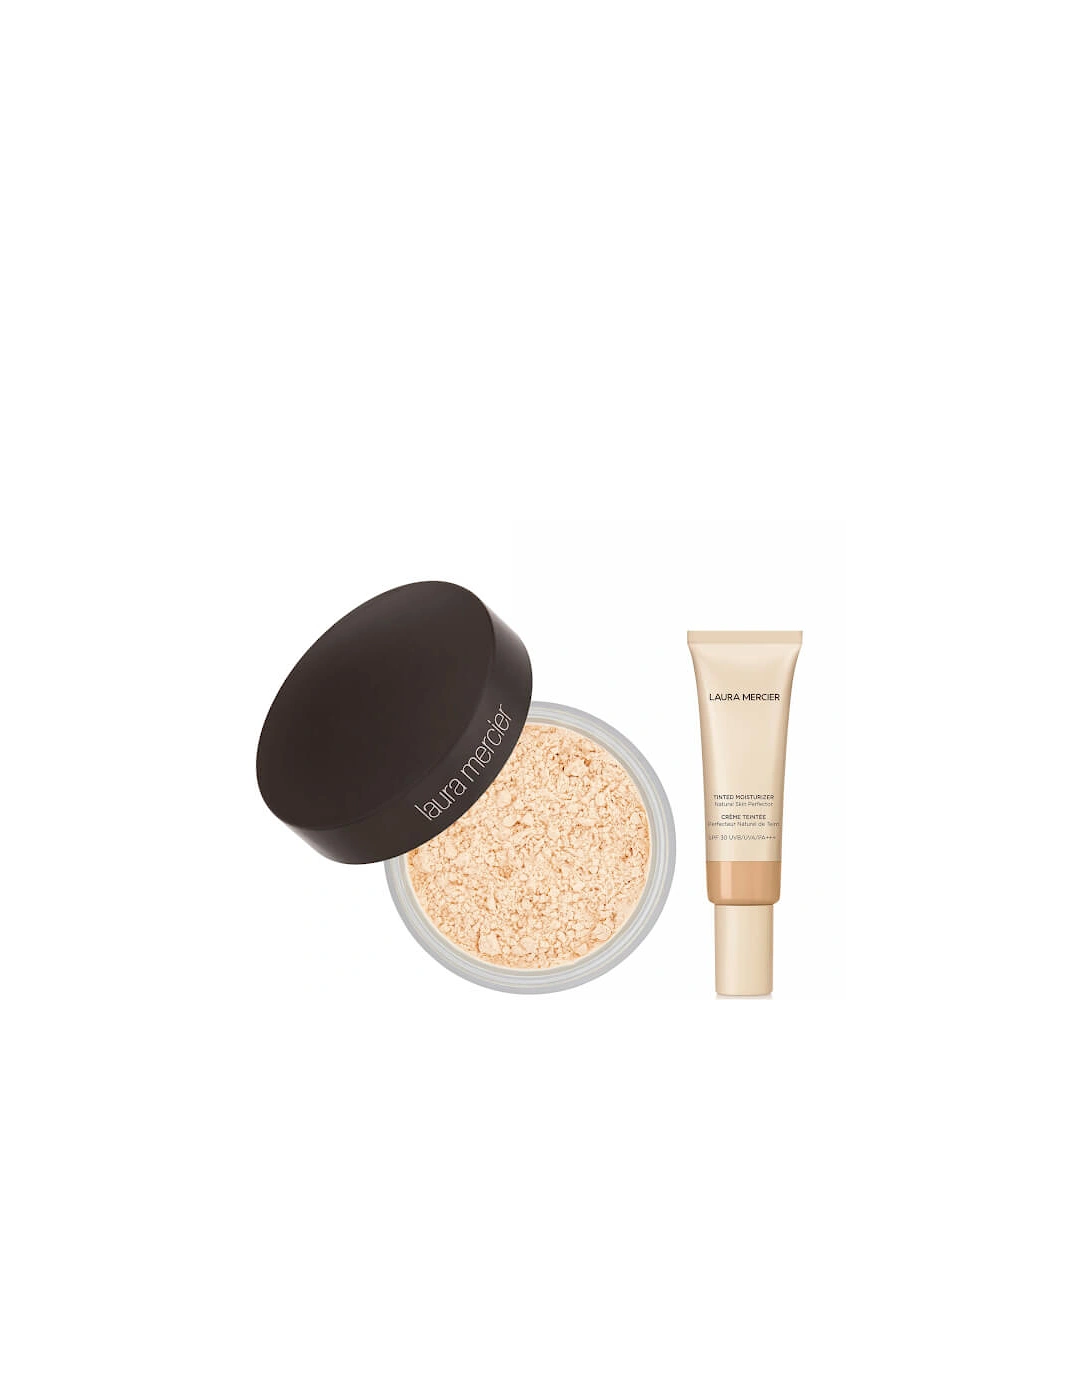 Translucent Loose Setting Powder and Tinted Moisturiser Duo - Bisque, 2 of 1